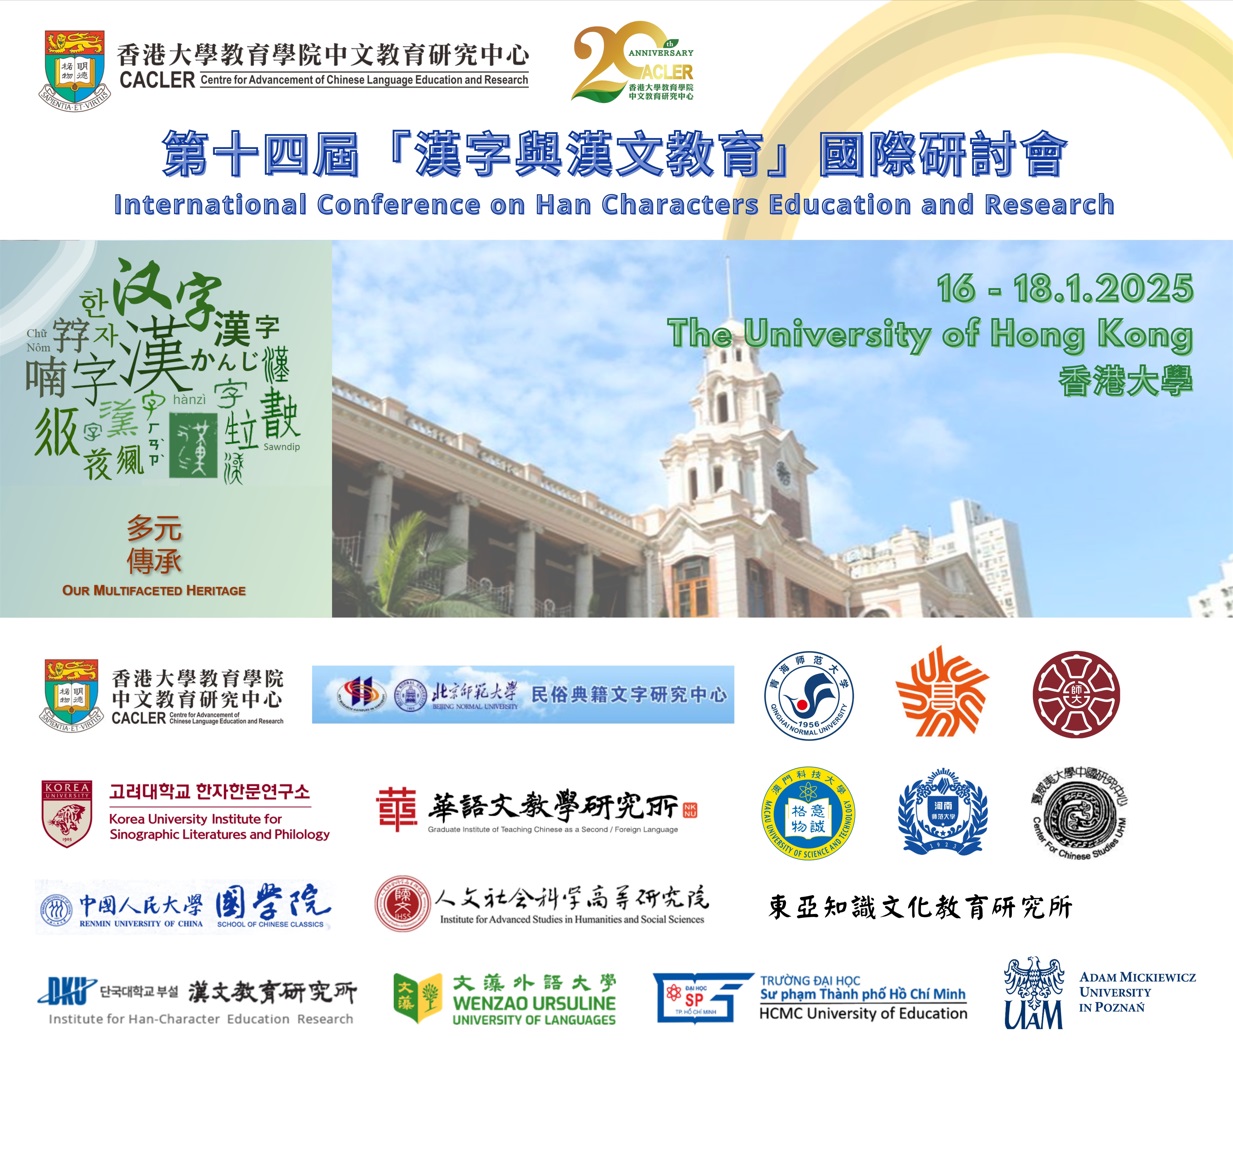 The 14th International Conference on Han Characters Education and Research title